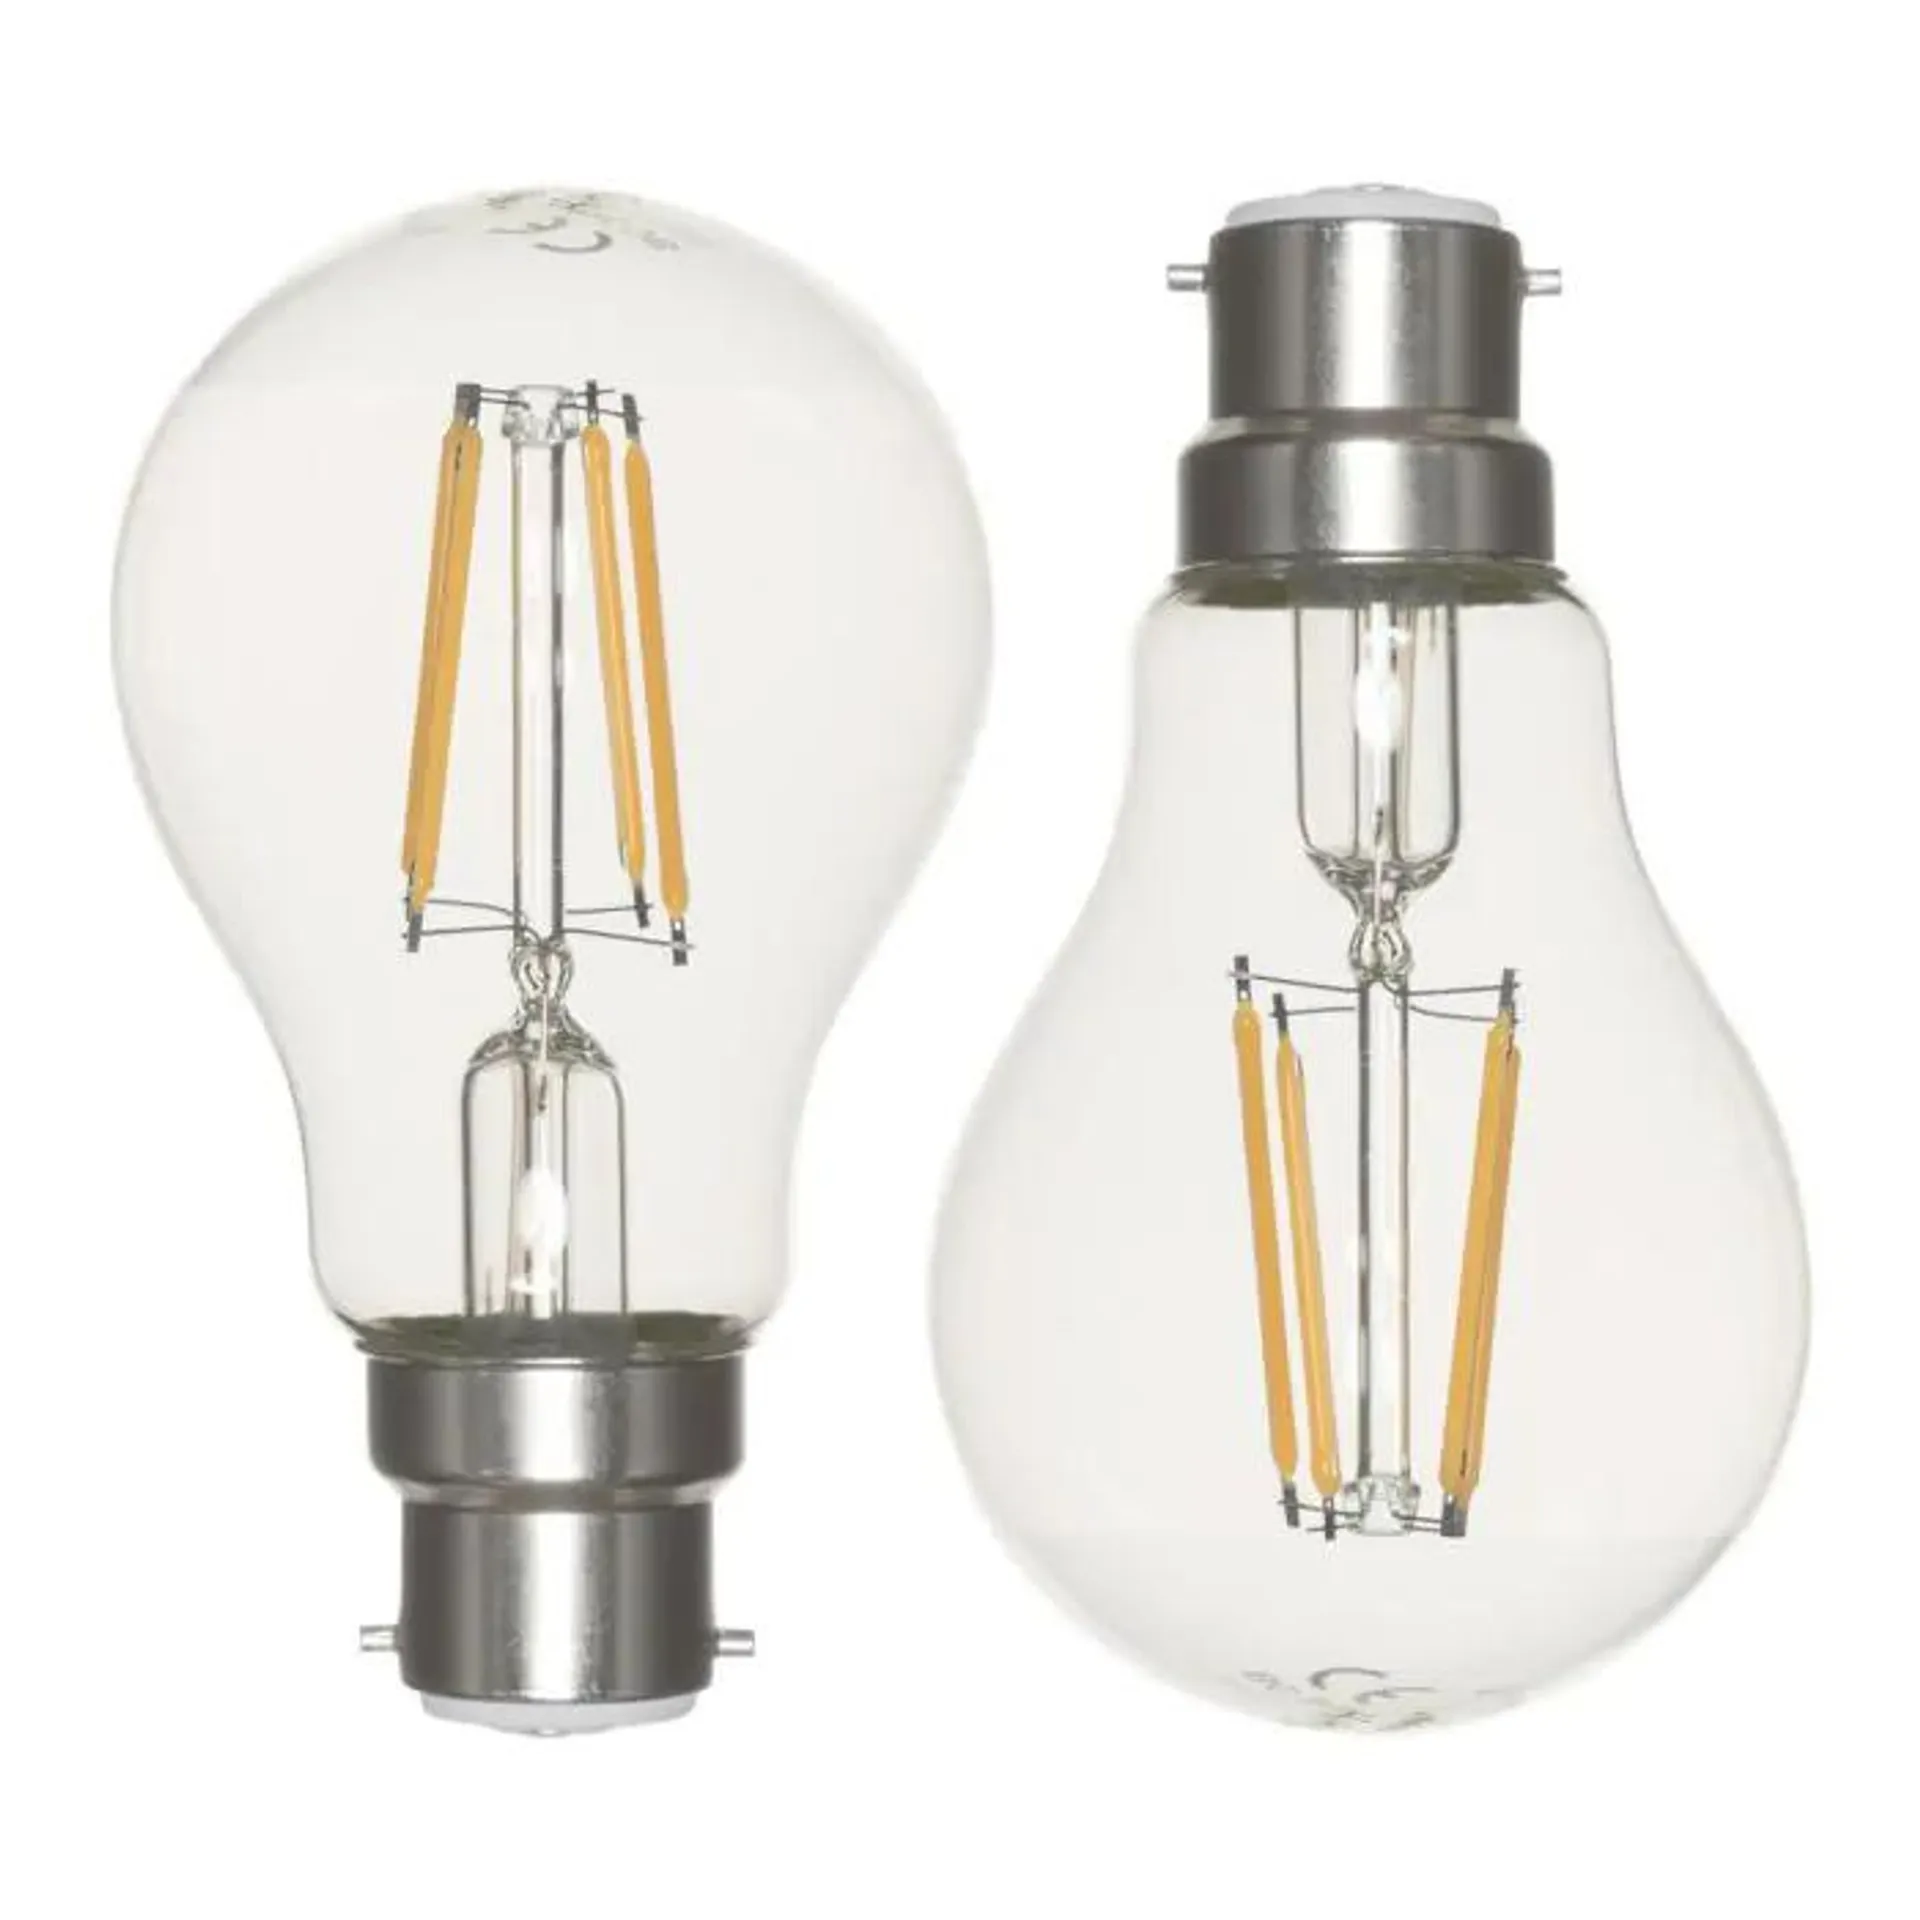 2 Pack of 6W LED Vintage Style BC B22 Classic Light Bulb, Warm White